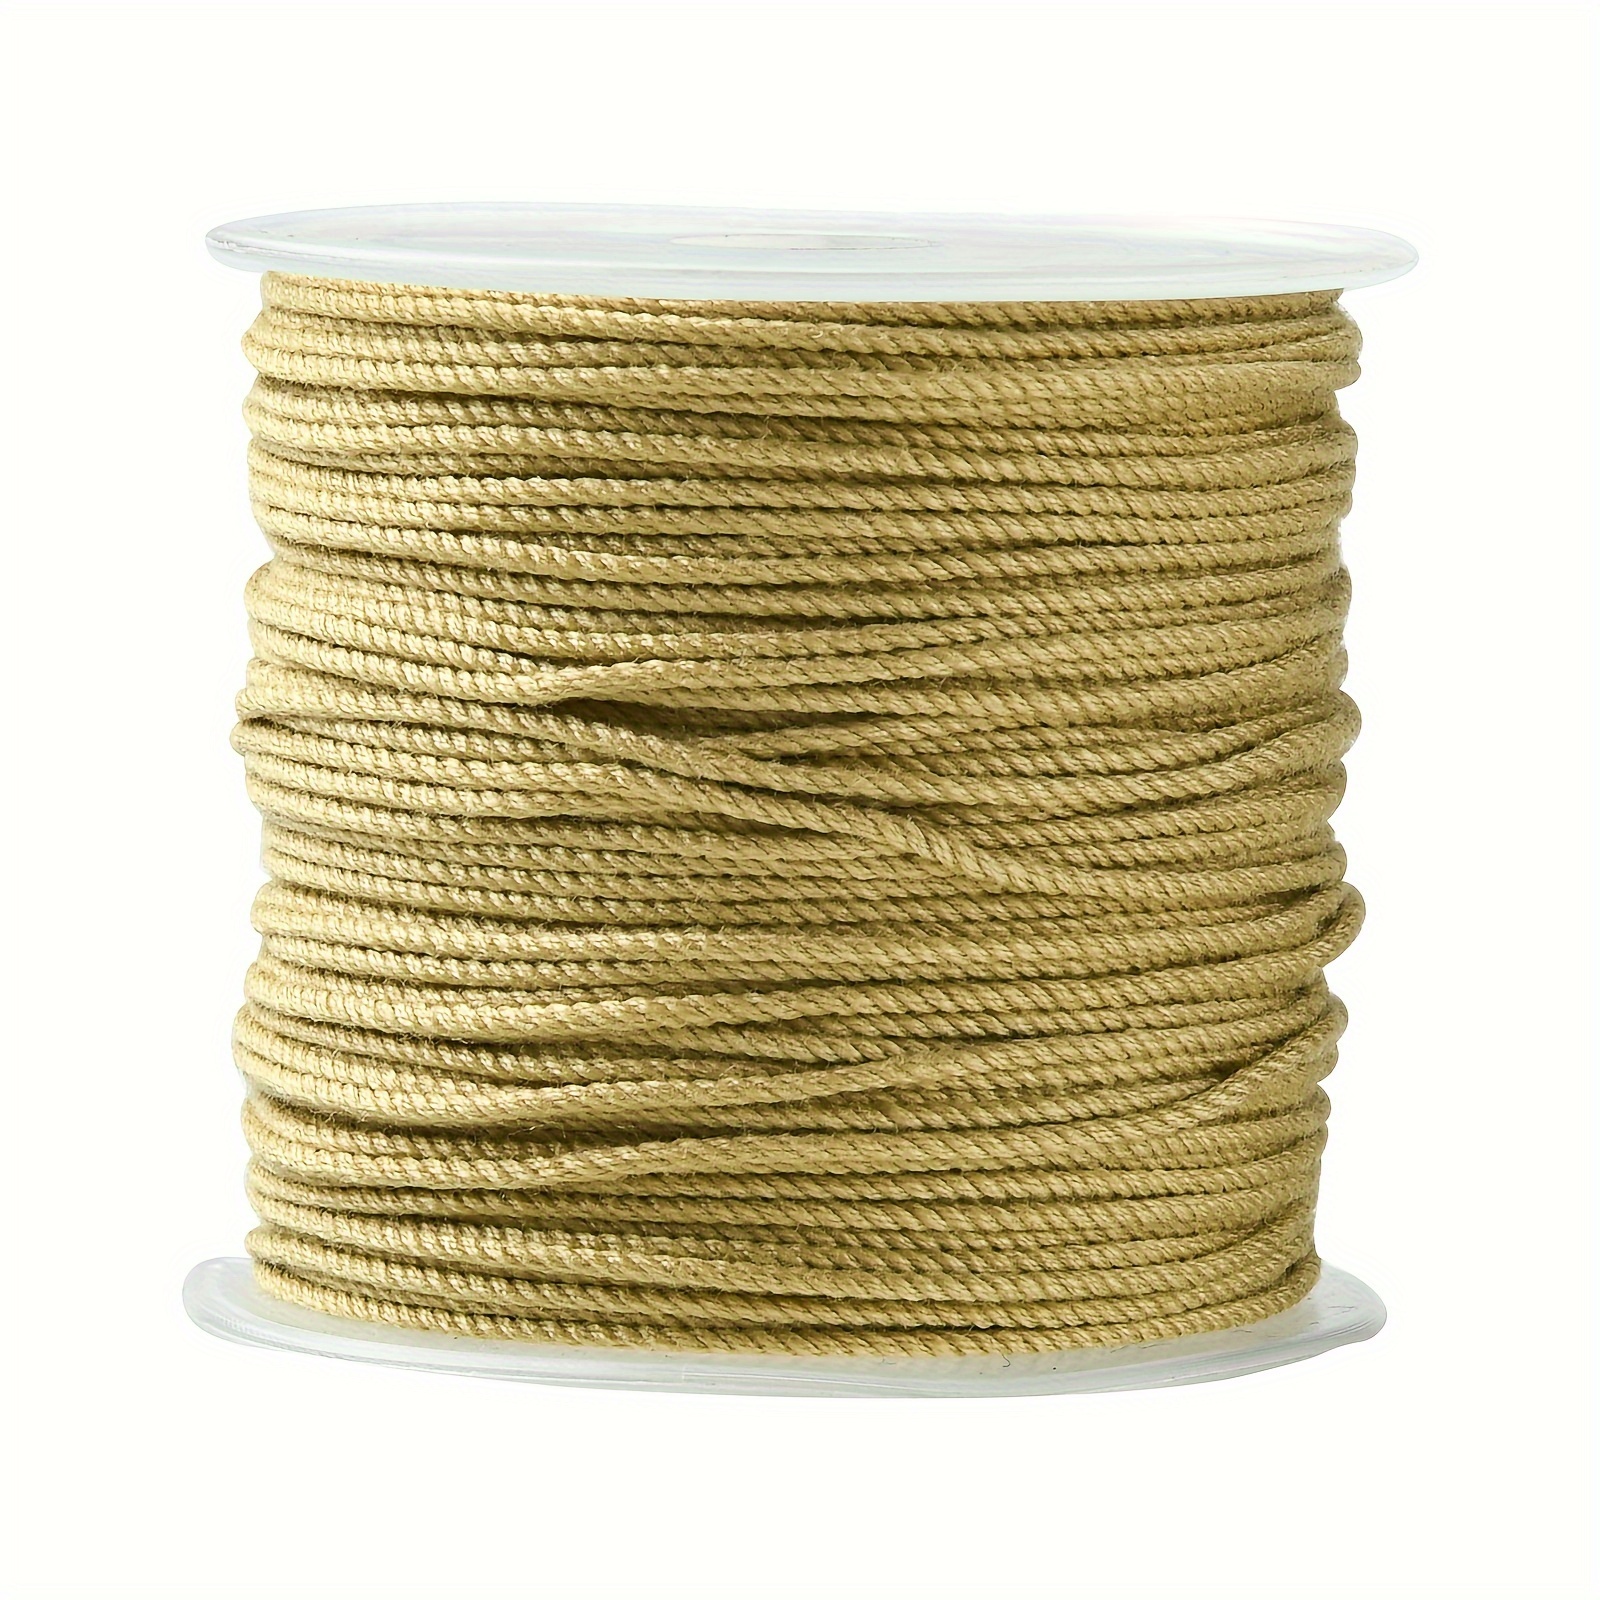 1 Roll 28m Cotton Cord Braided Rope With Plastic Reel Gift Rope